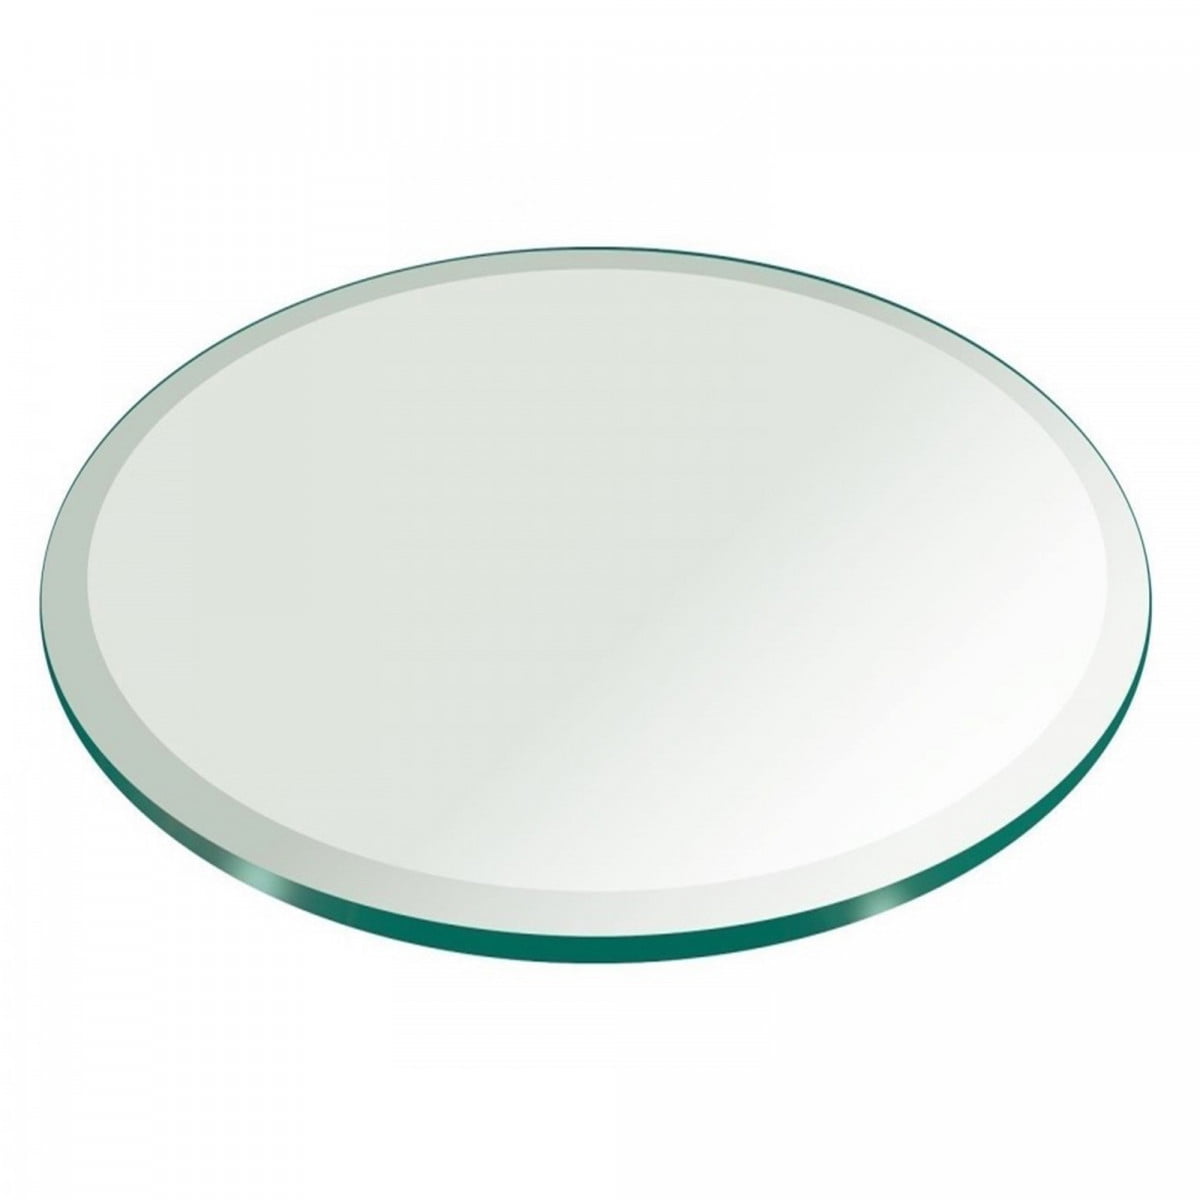 36 Inch Round Glass Table Top, 1/4 Inch Thick Clear Tempered Glass With